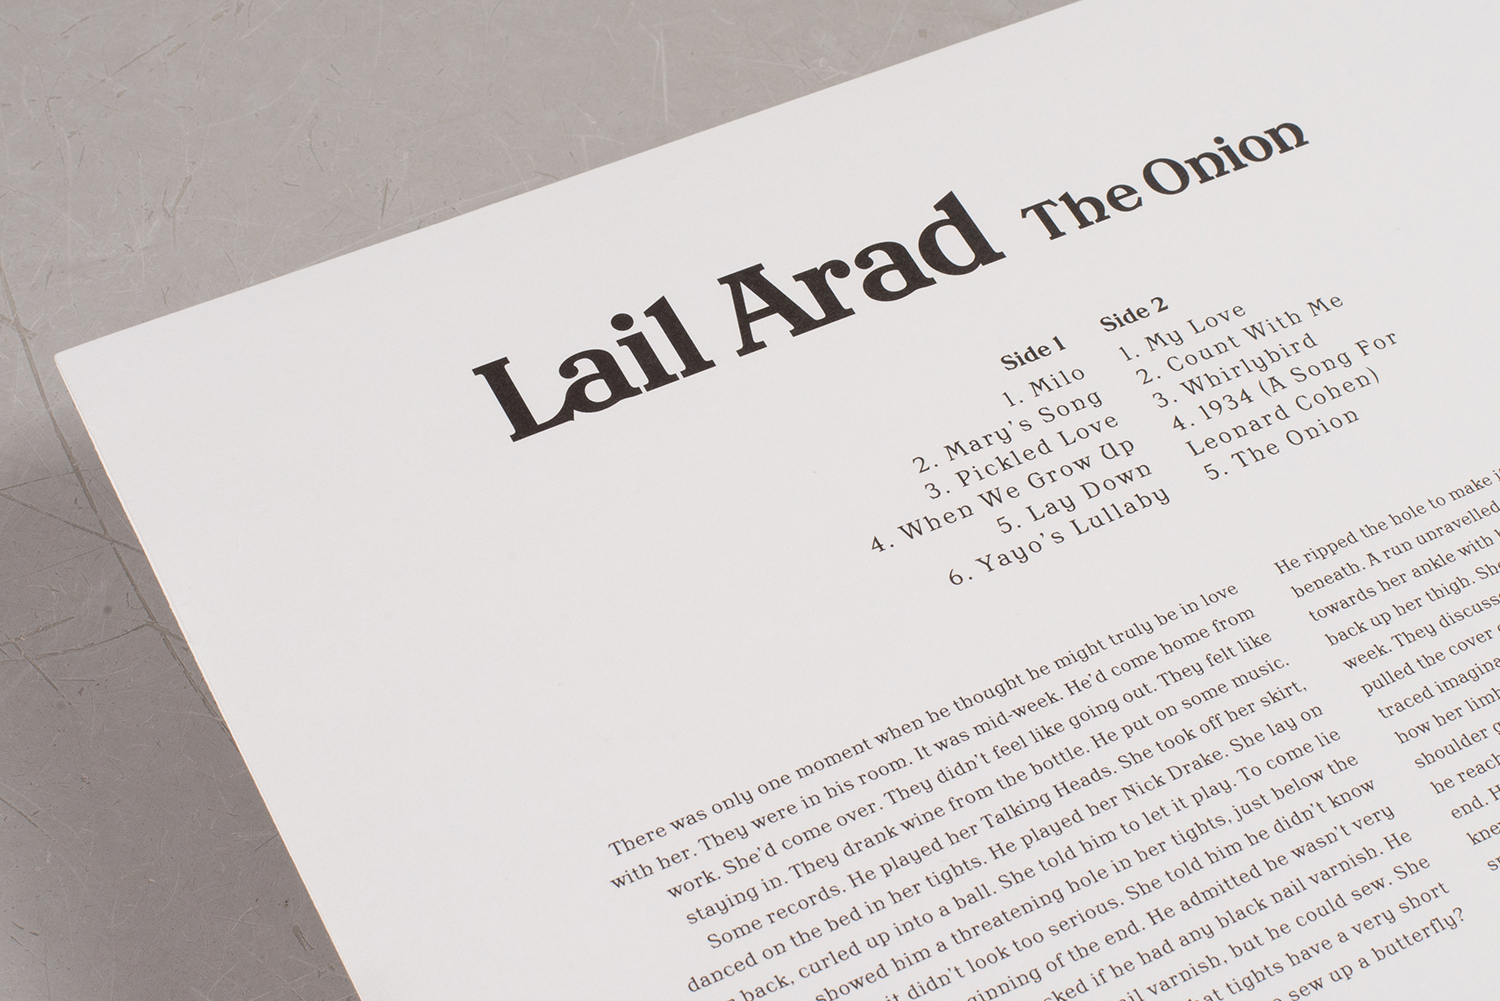 Lail Arad, The Onion LP, The Vinyl Factory_0004_untitled (11 of 27)